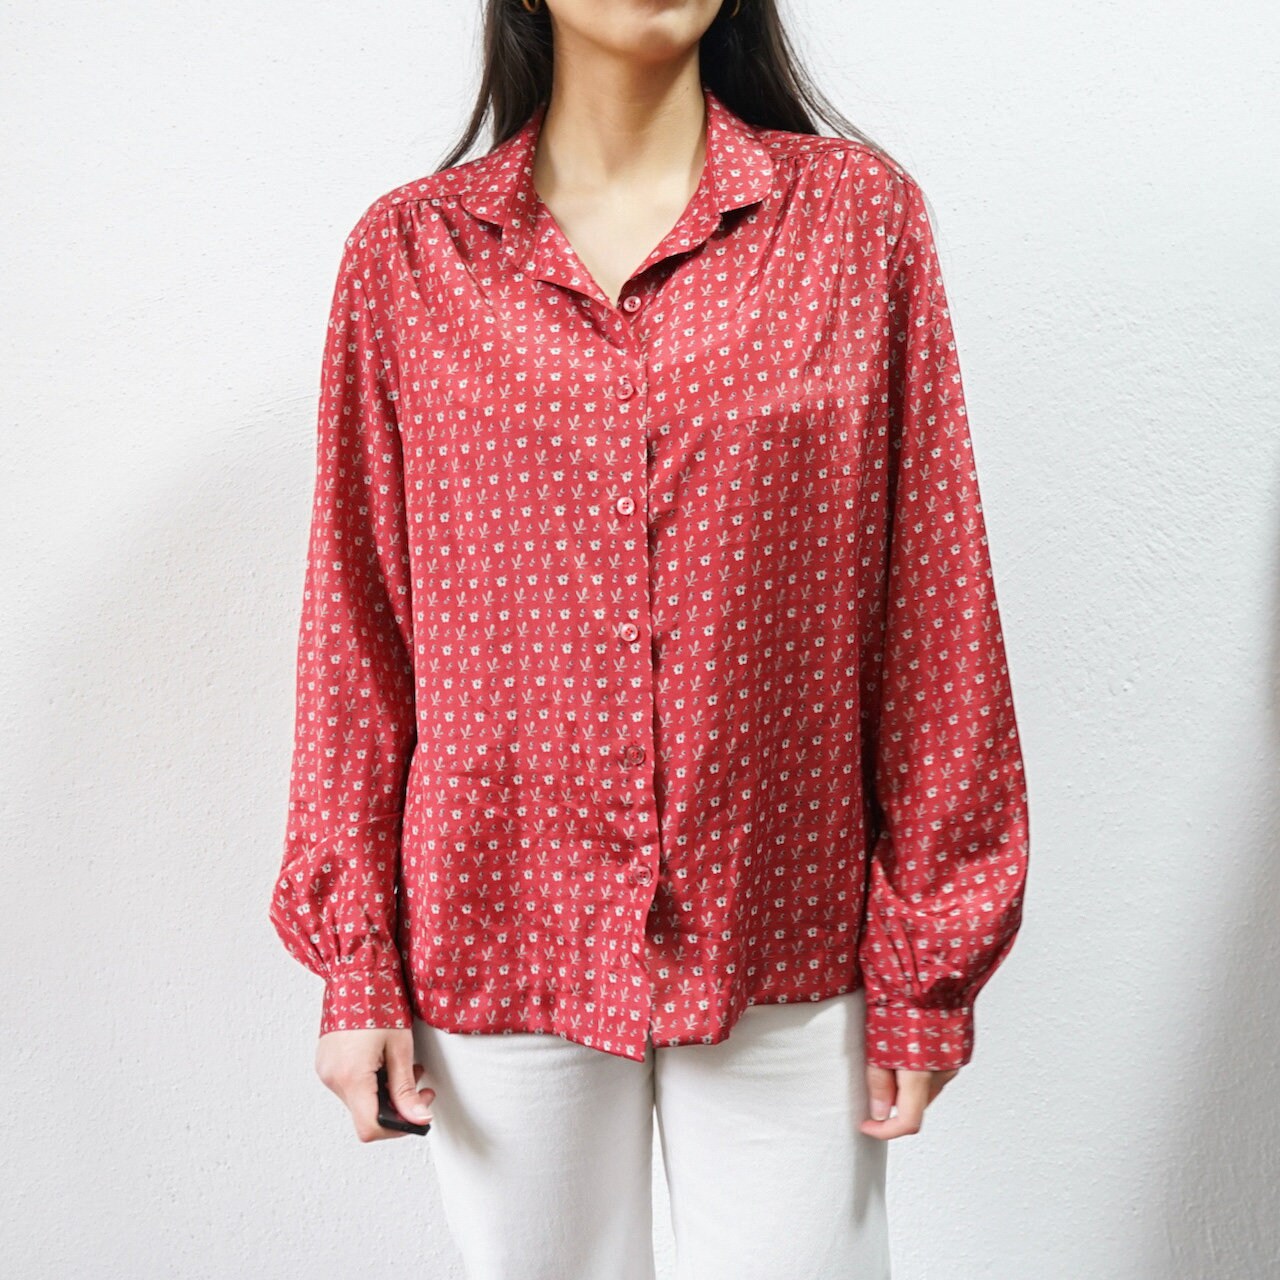 Vintage red Blouse size S-M long sleeved